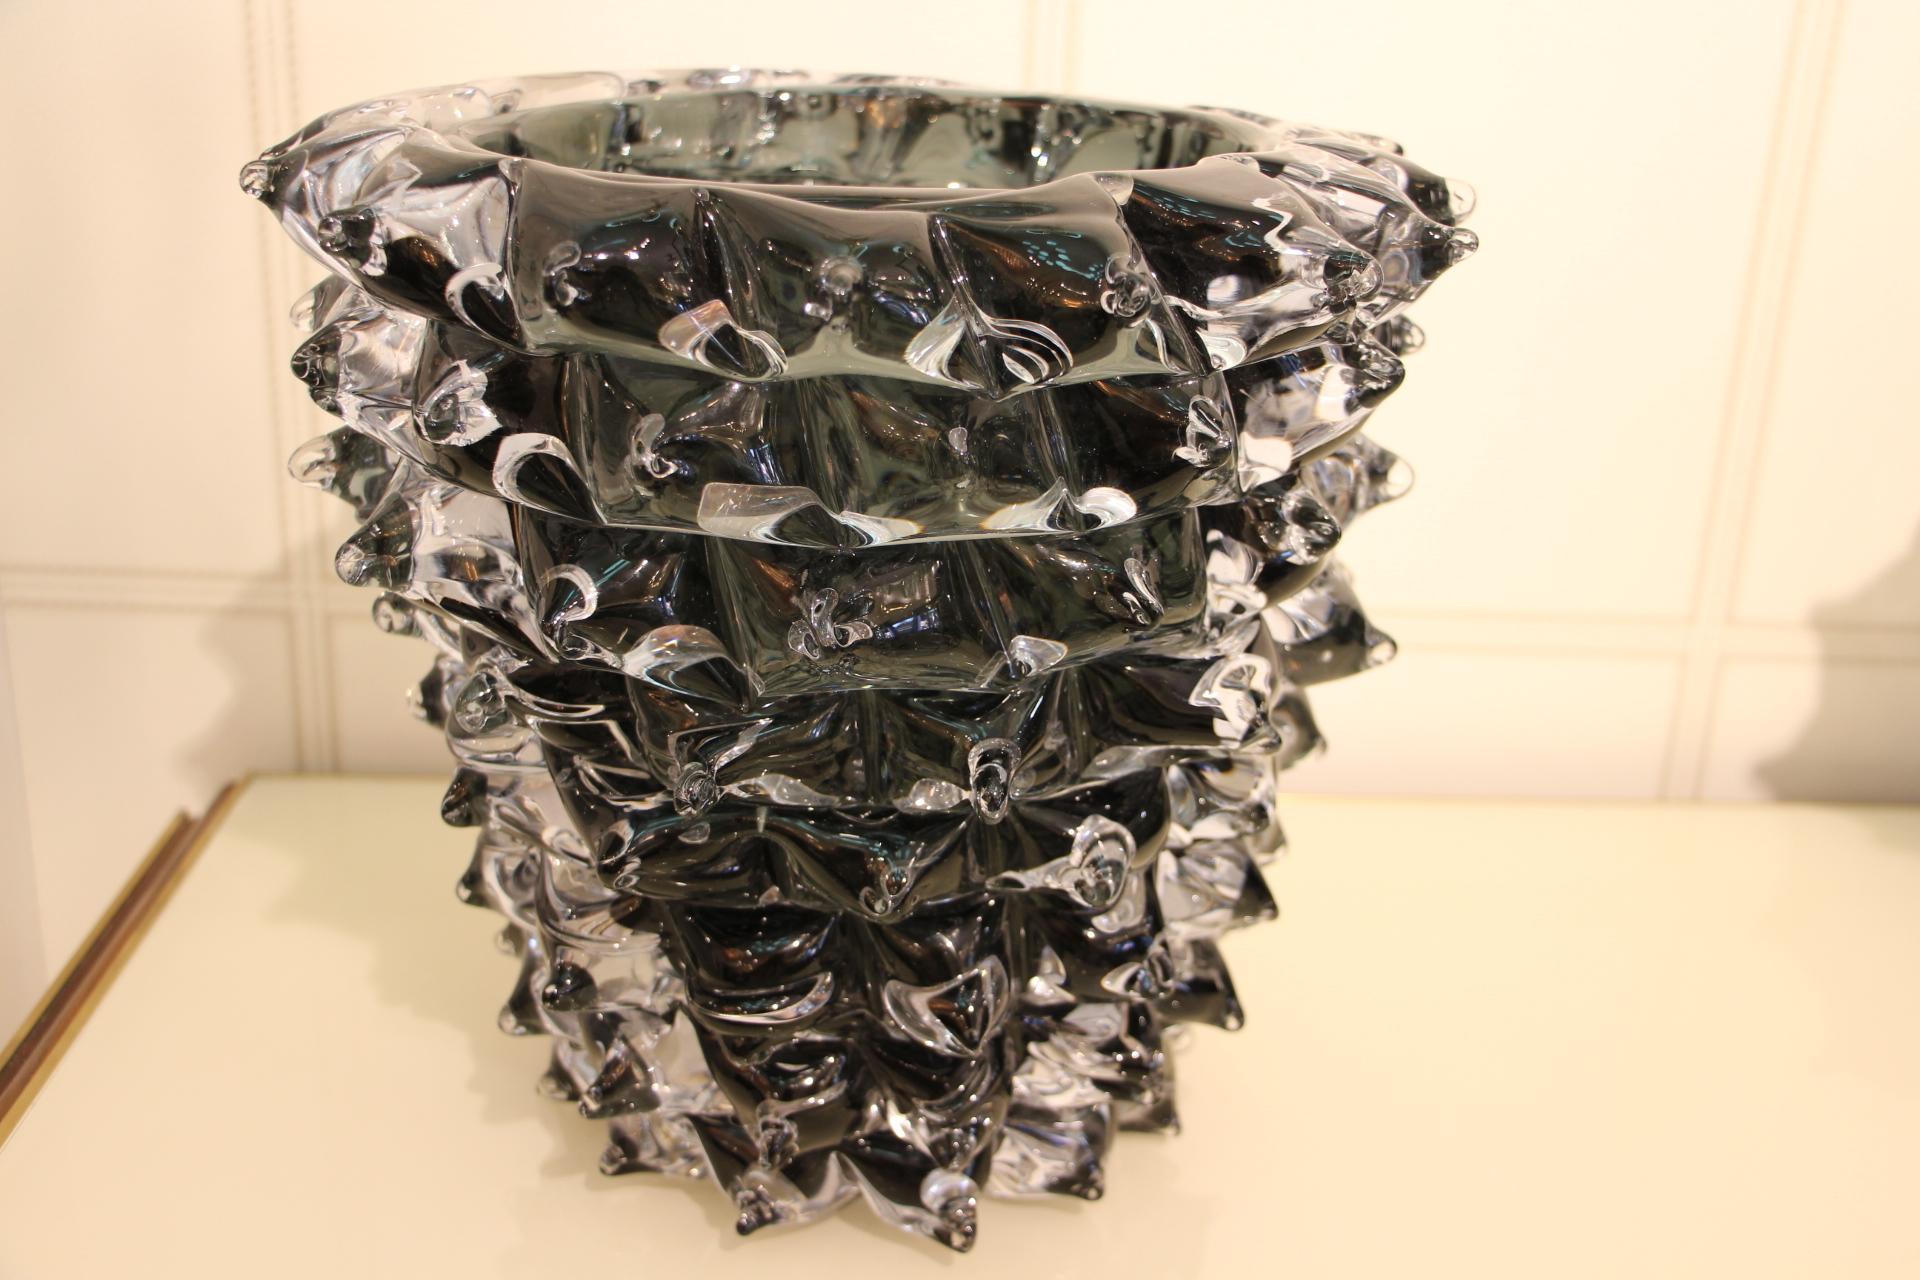 A spectacular piece of Venetian vases, imposing size in clear and deep dark blown Murano glass, hand decorated with the rostrato technique: spikes of glass individually pulled in relief.
Thick walled casing glass produces a lot of iridescent